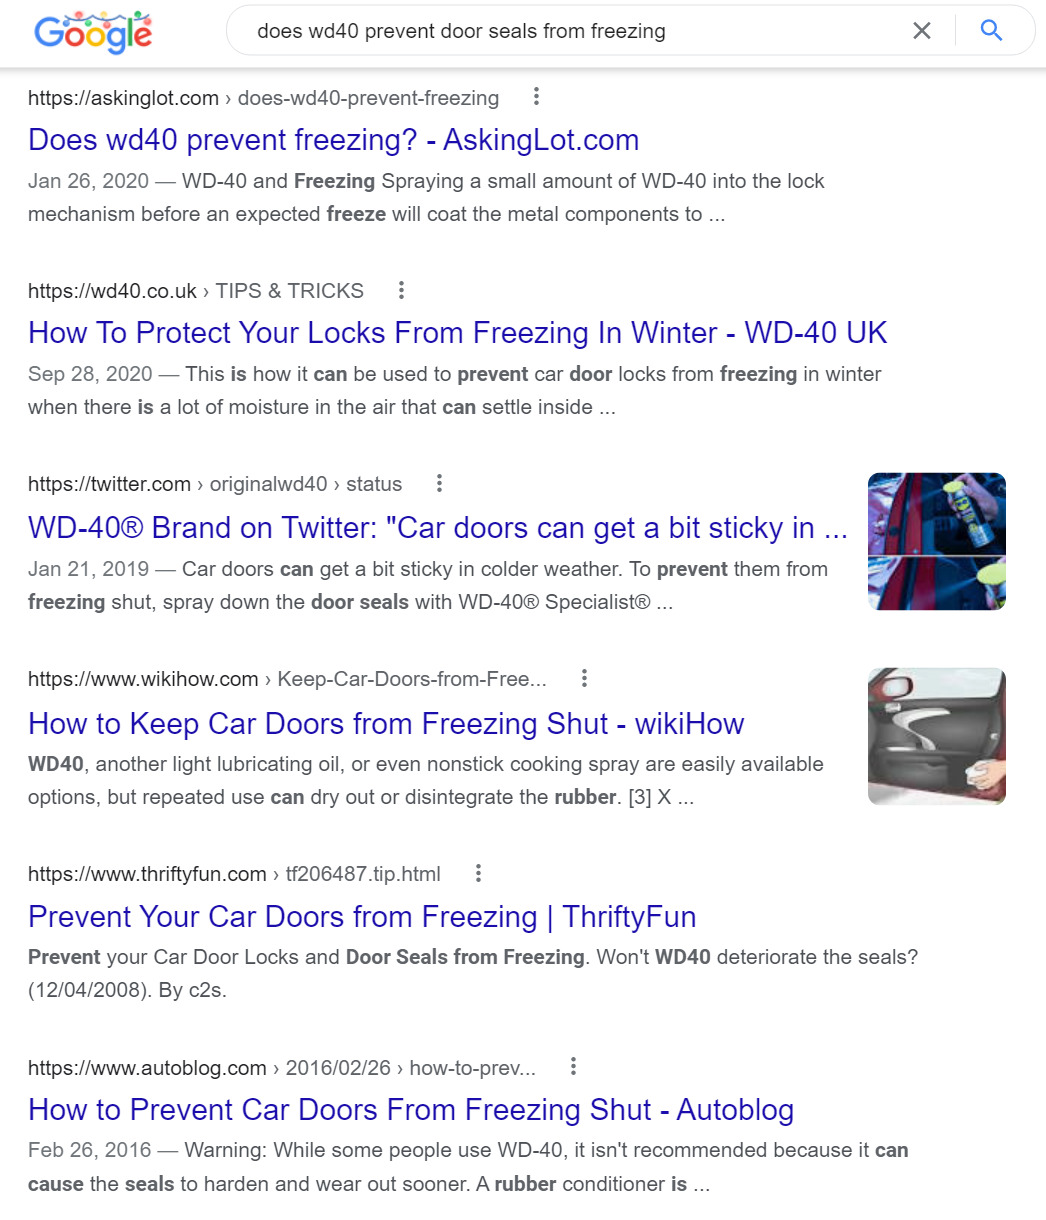 Google SERP for "does wd40 prevent door seals from freezing"